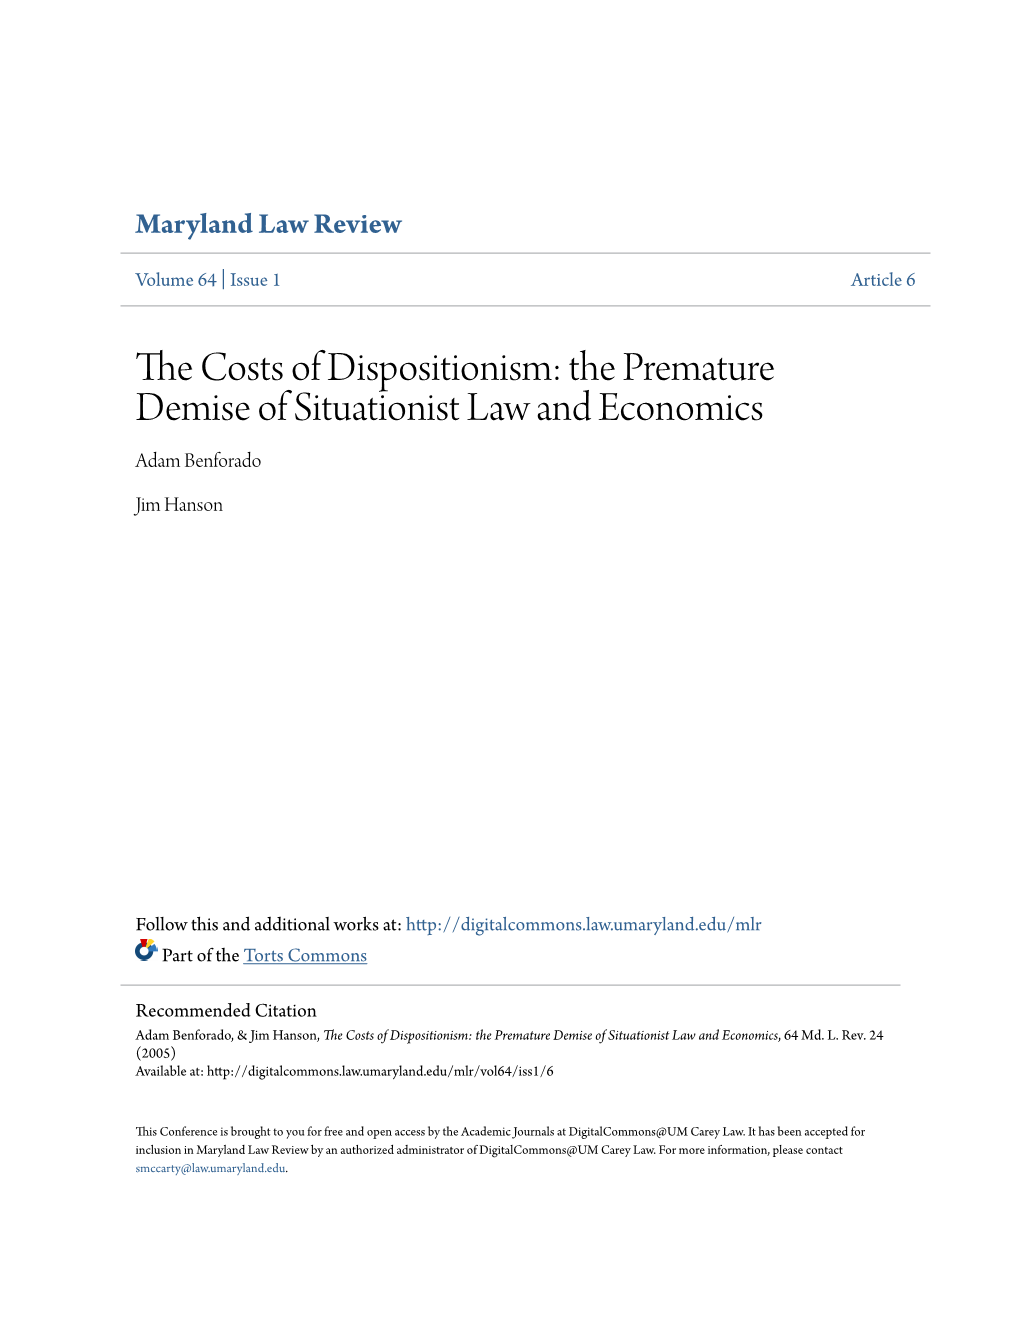 The Costs of Dispositionism: the Premature Demise of Situationist Law and Economics, 64 Md